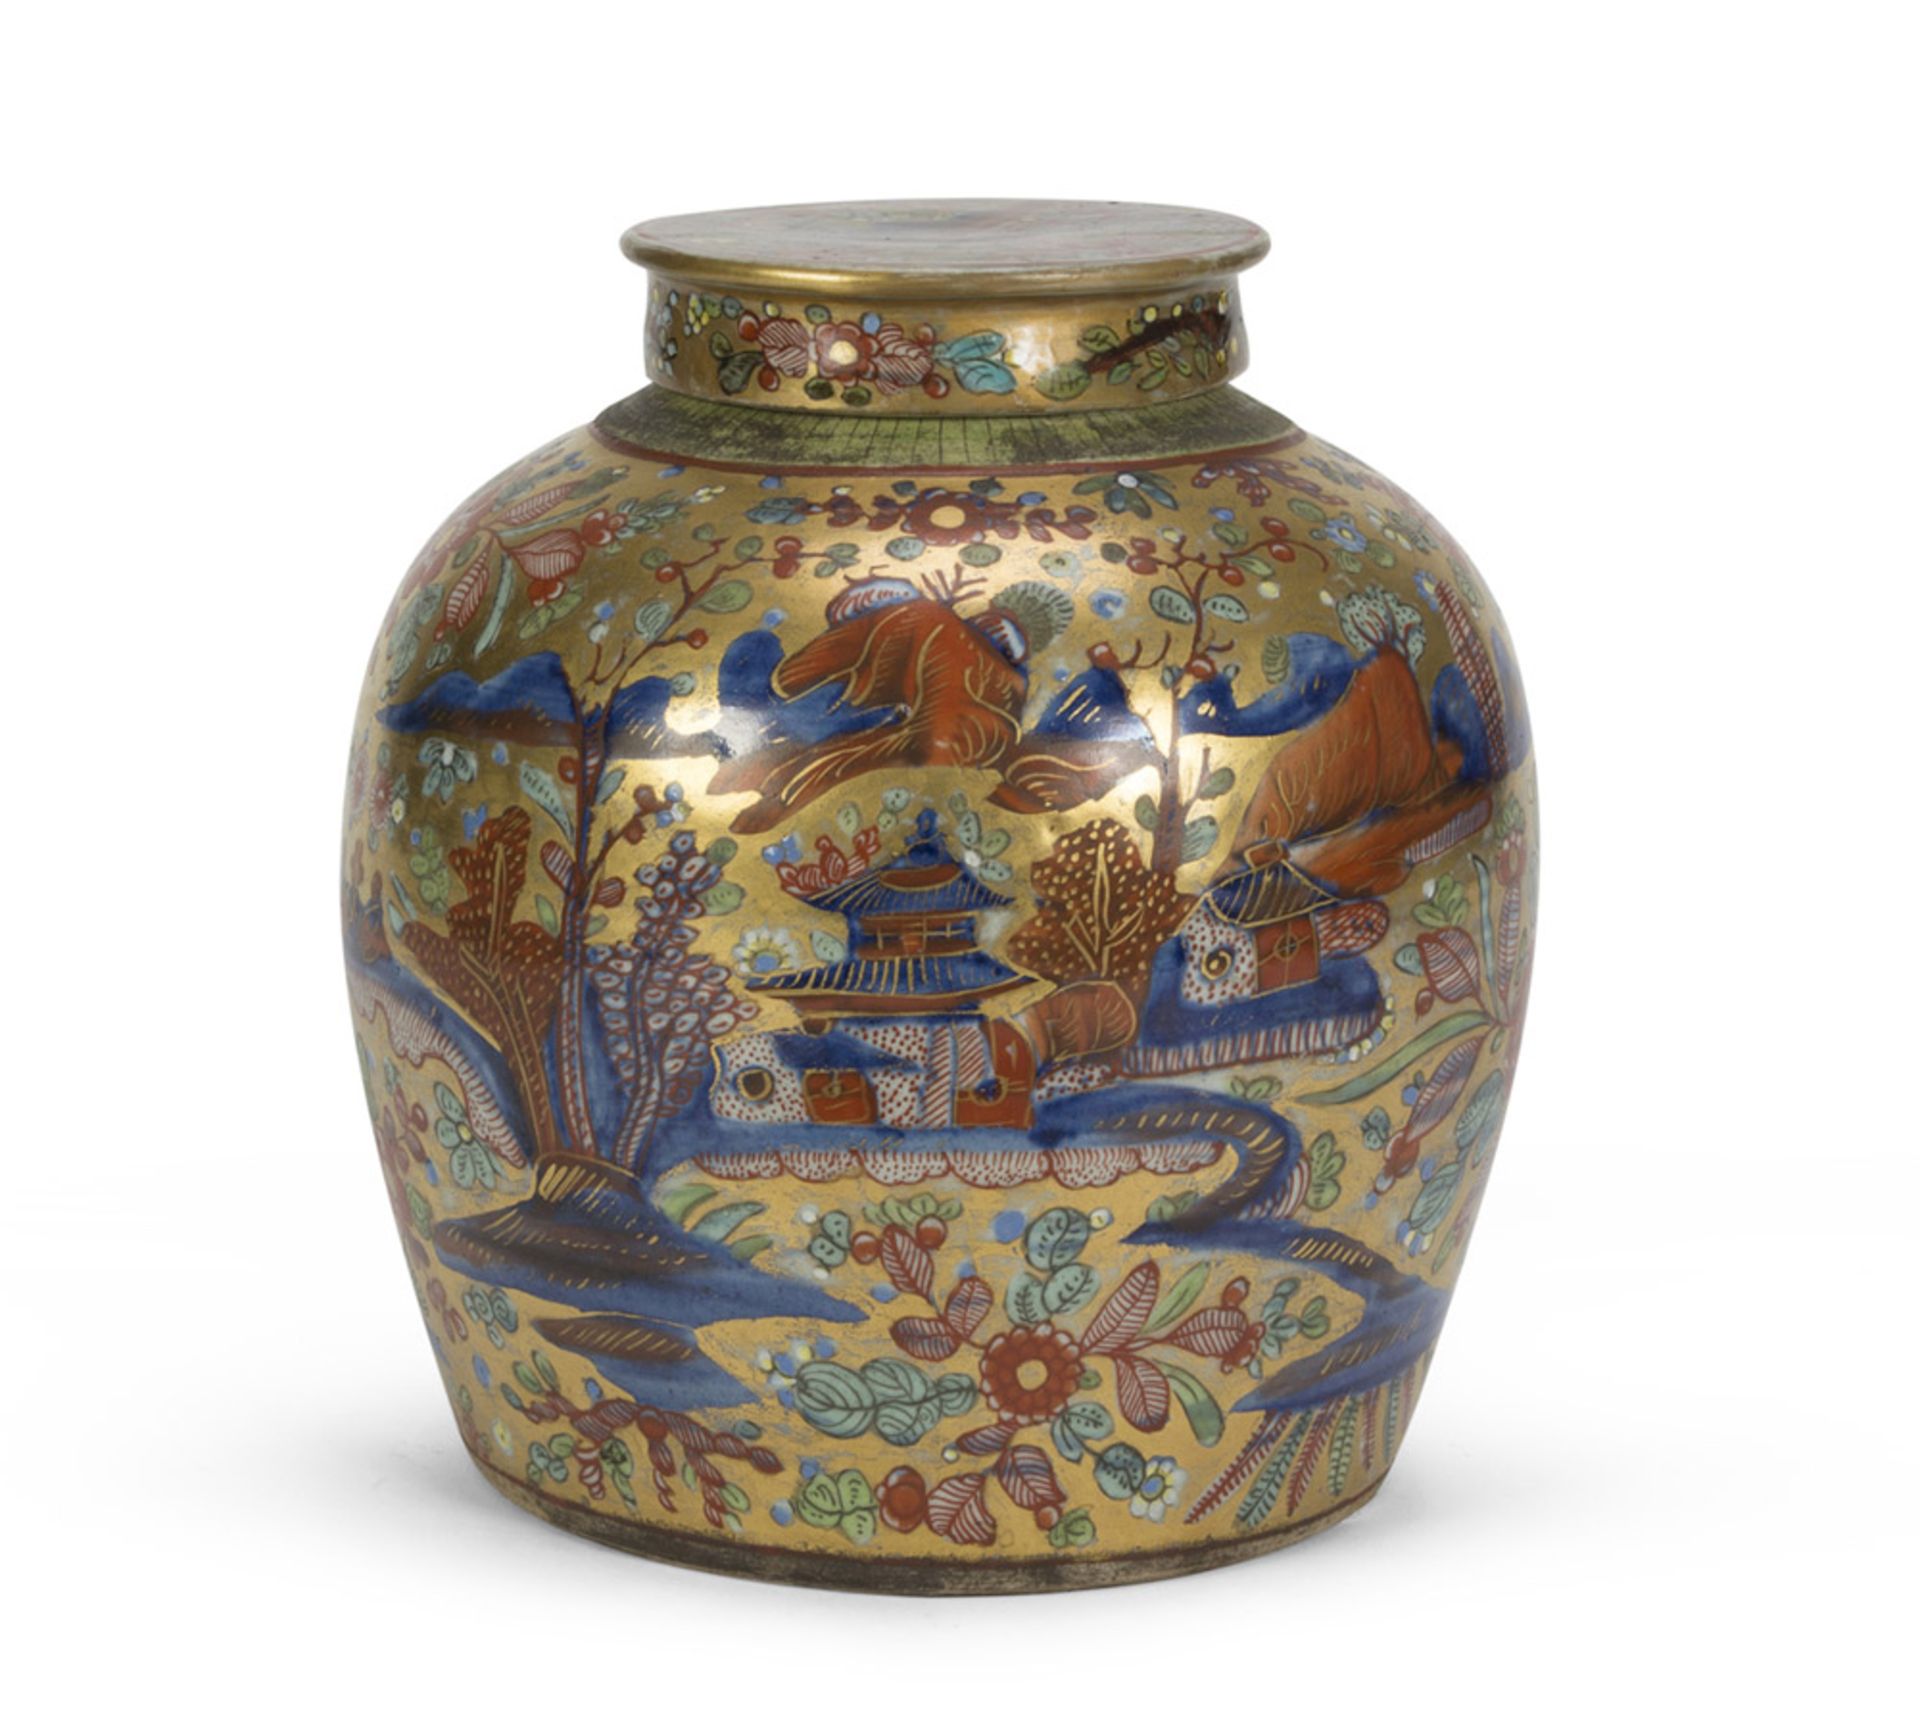 PORCELAIN POTICHE IN POLYCHROME AND GOLD ENAMELS, EARLY 20TH CENTURY